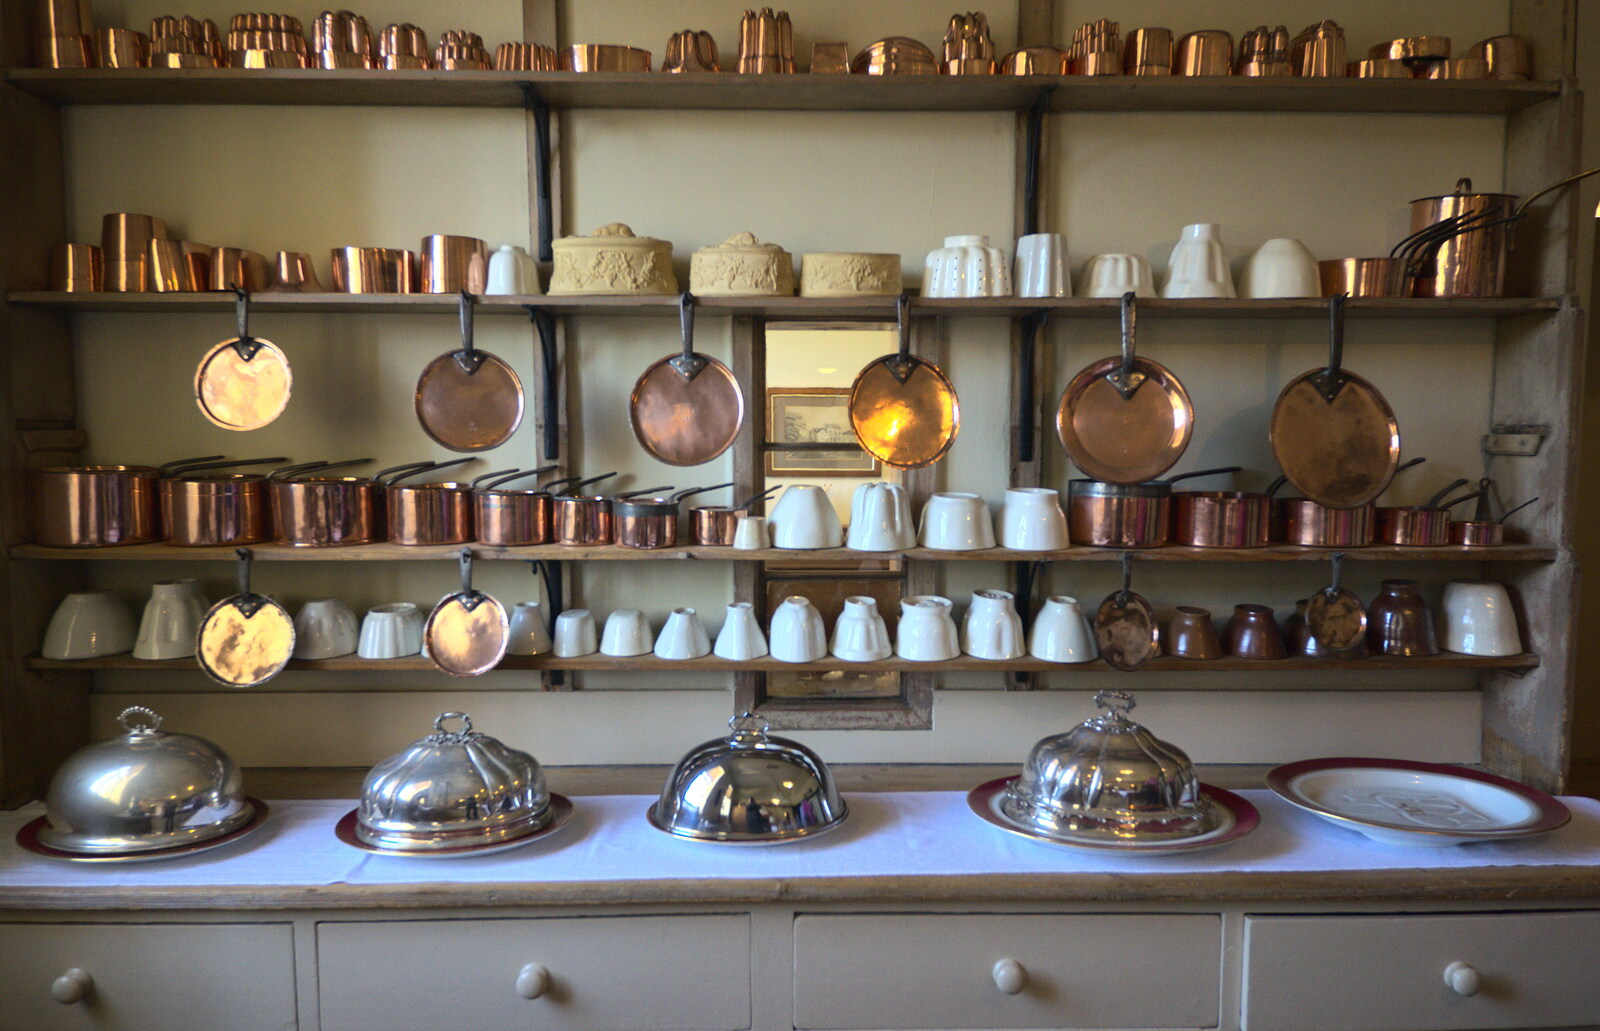 An impressive collection of copper from A Trip to Audley End House, Saffron Walden, Essex - 16th April 2014